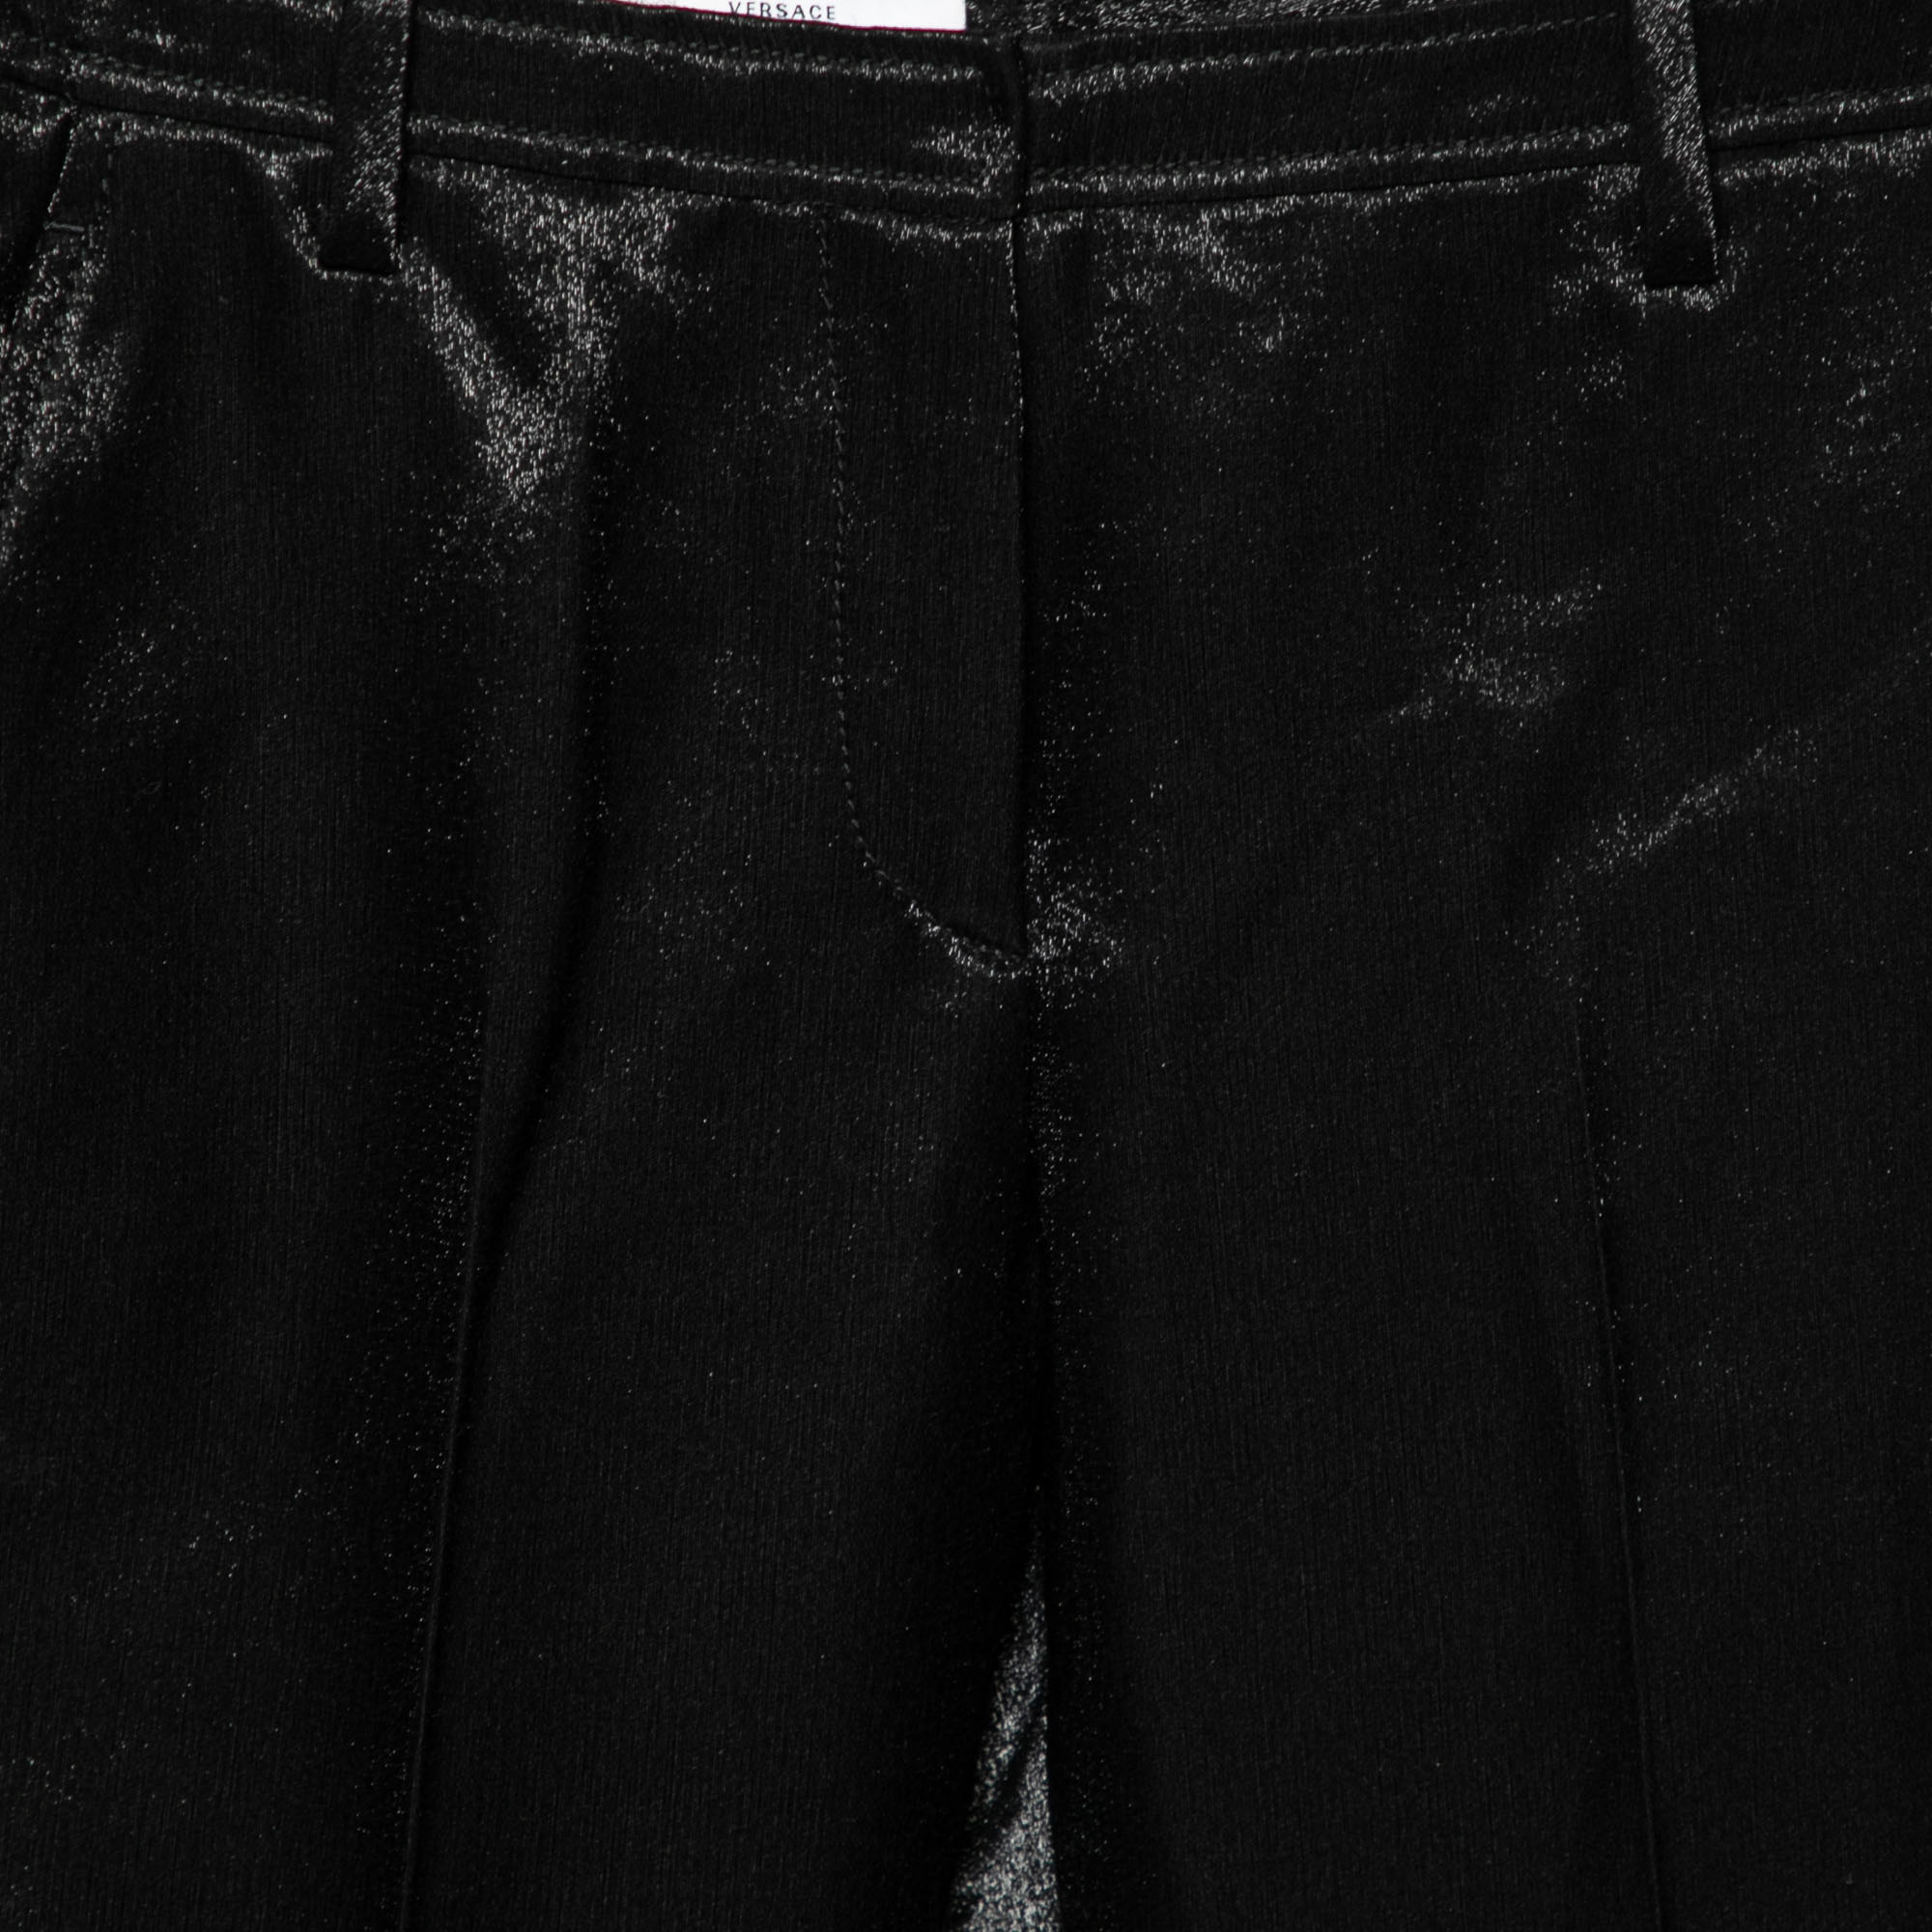 Versace Collection Black Textured Wool Pants S